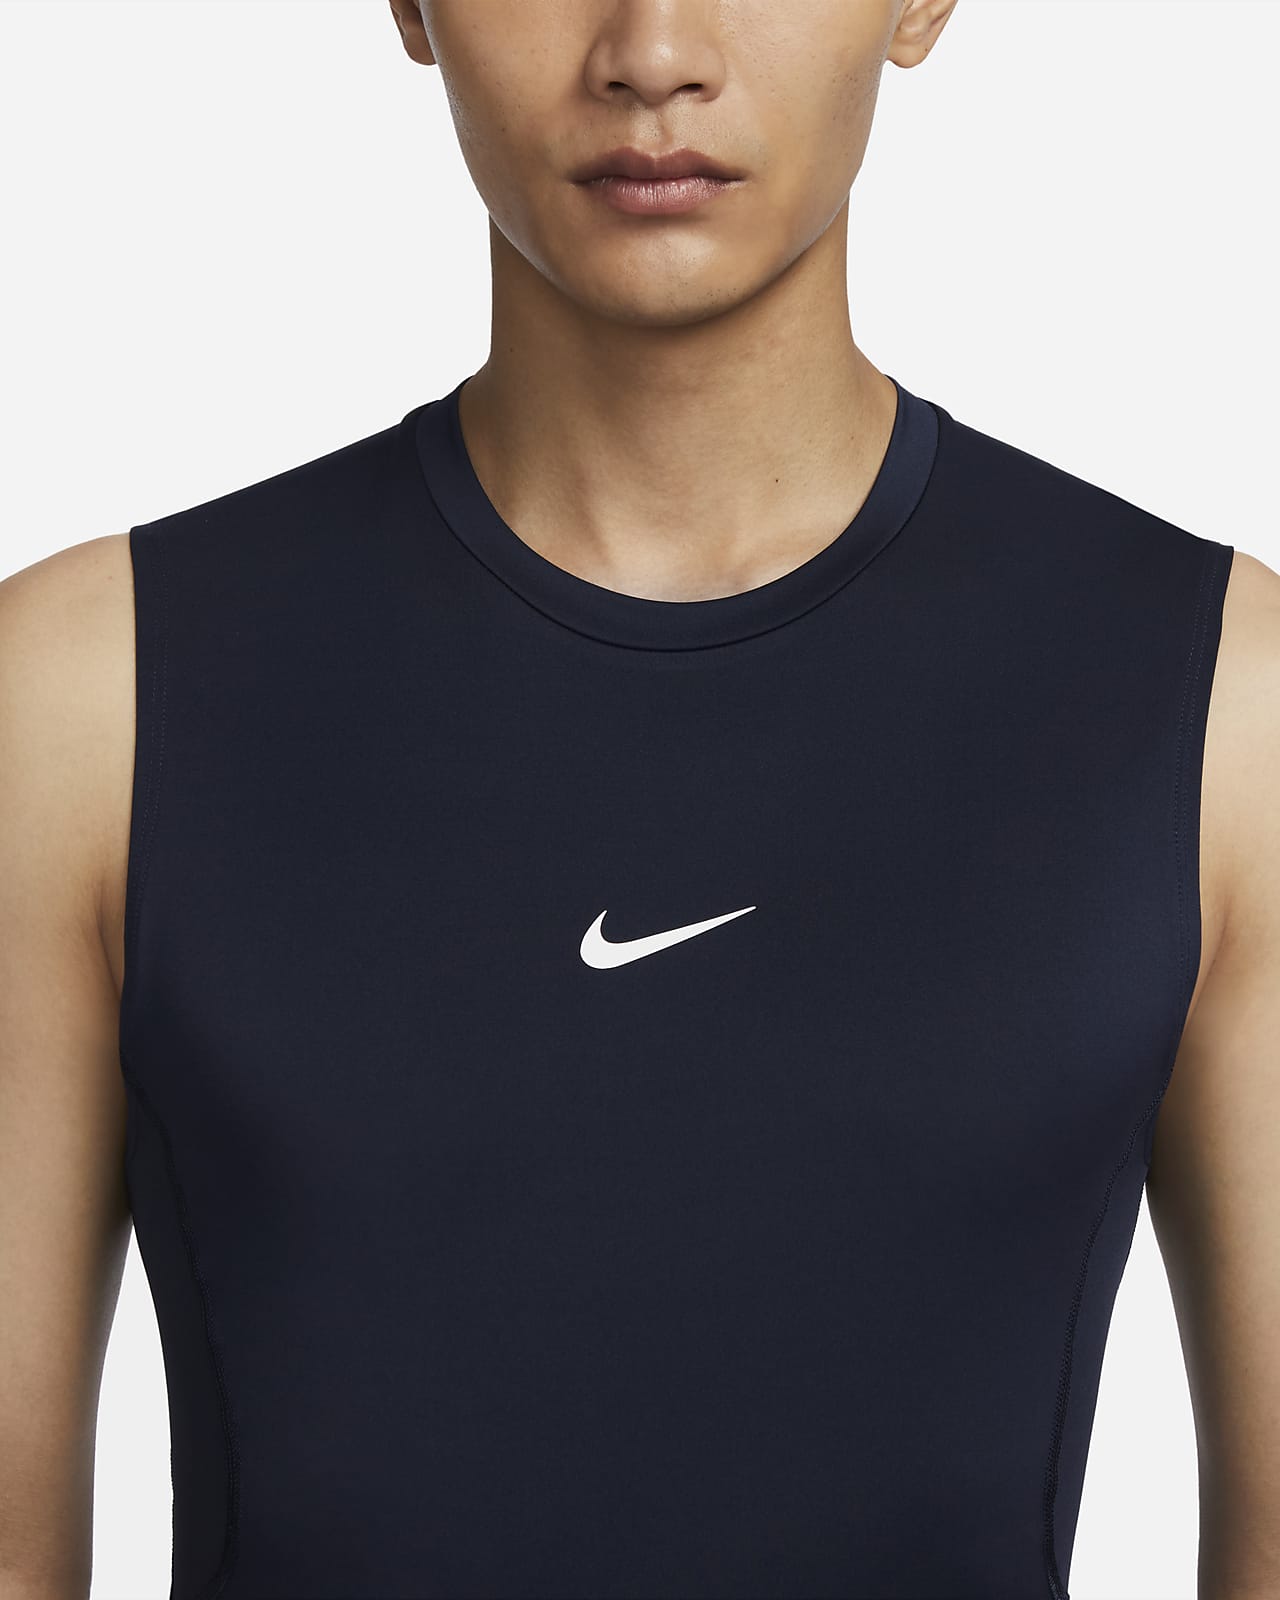 Men's Activewear by   Compression tank top, Nike compression, Athletic  tank tops